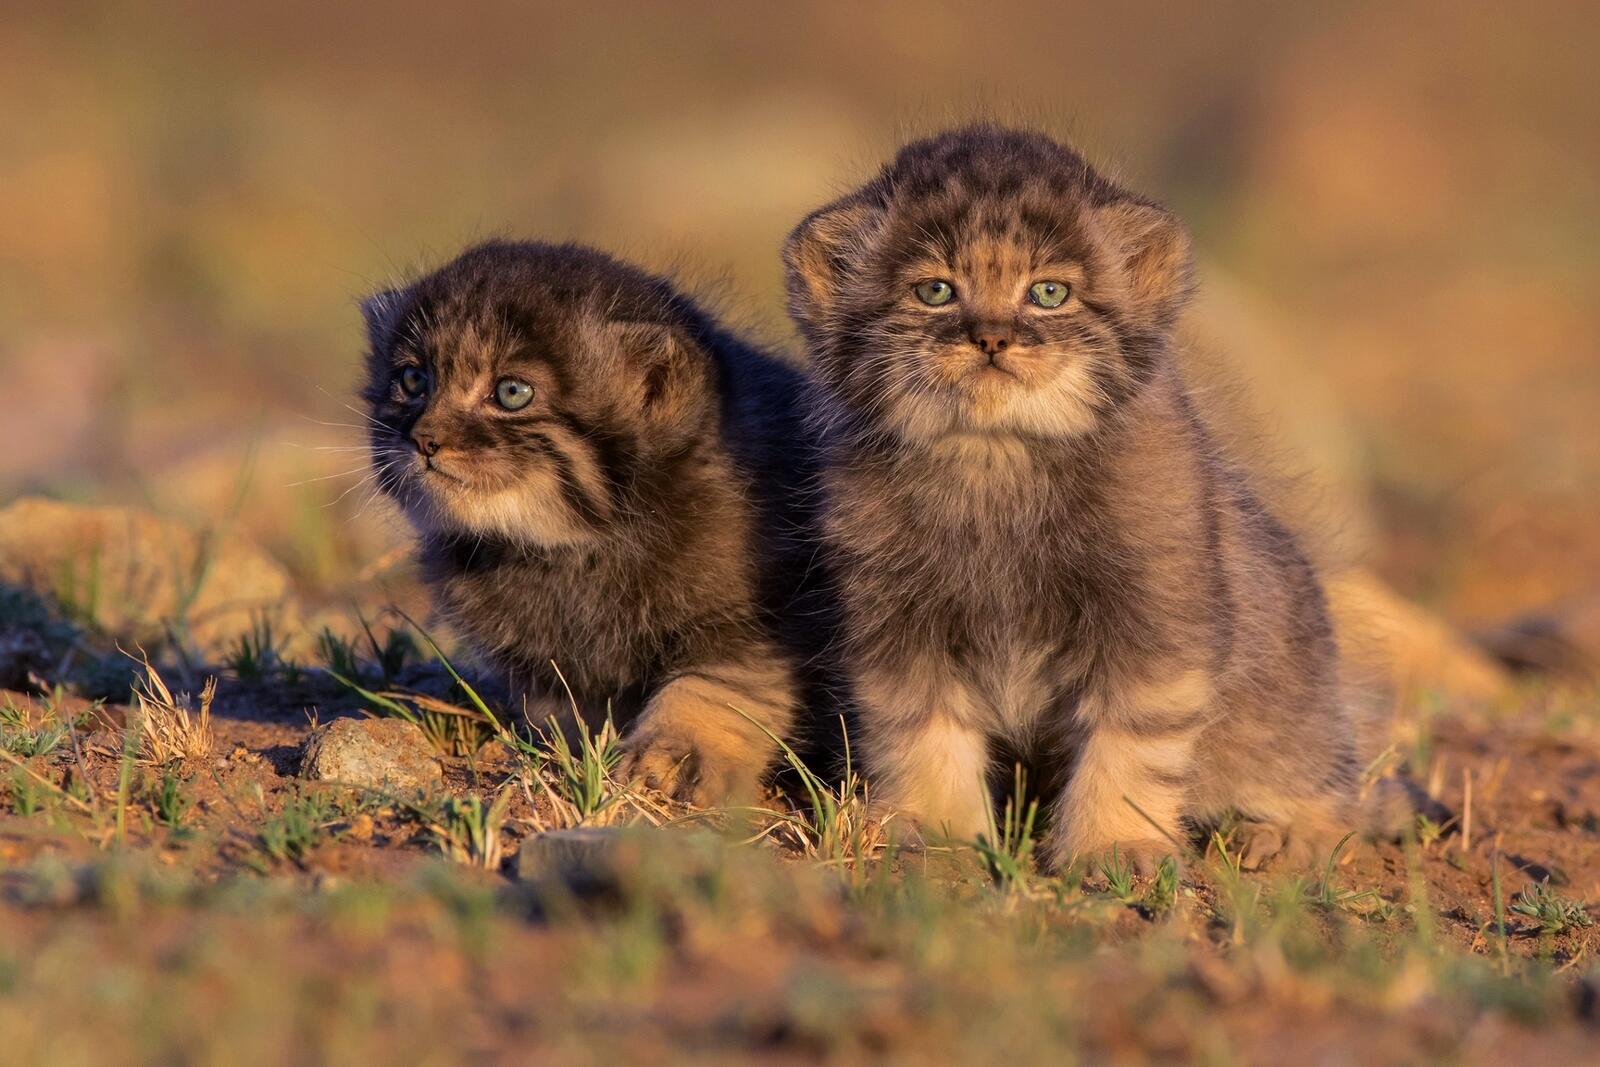 Wallpapers wild cats cute photography on the desktop